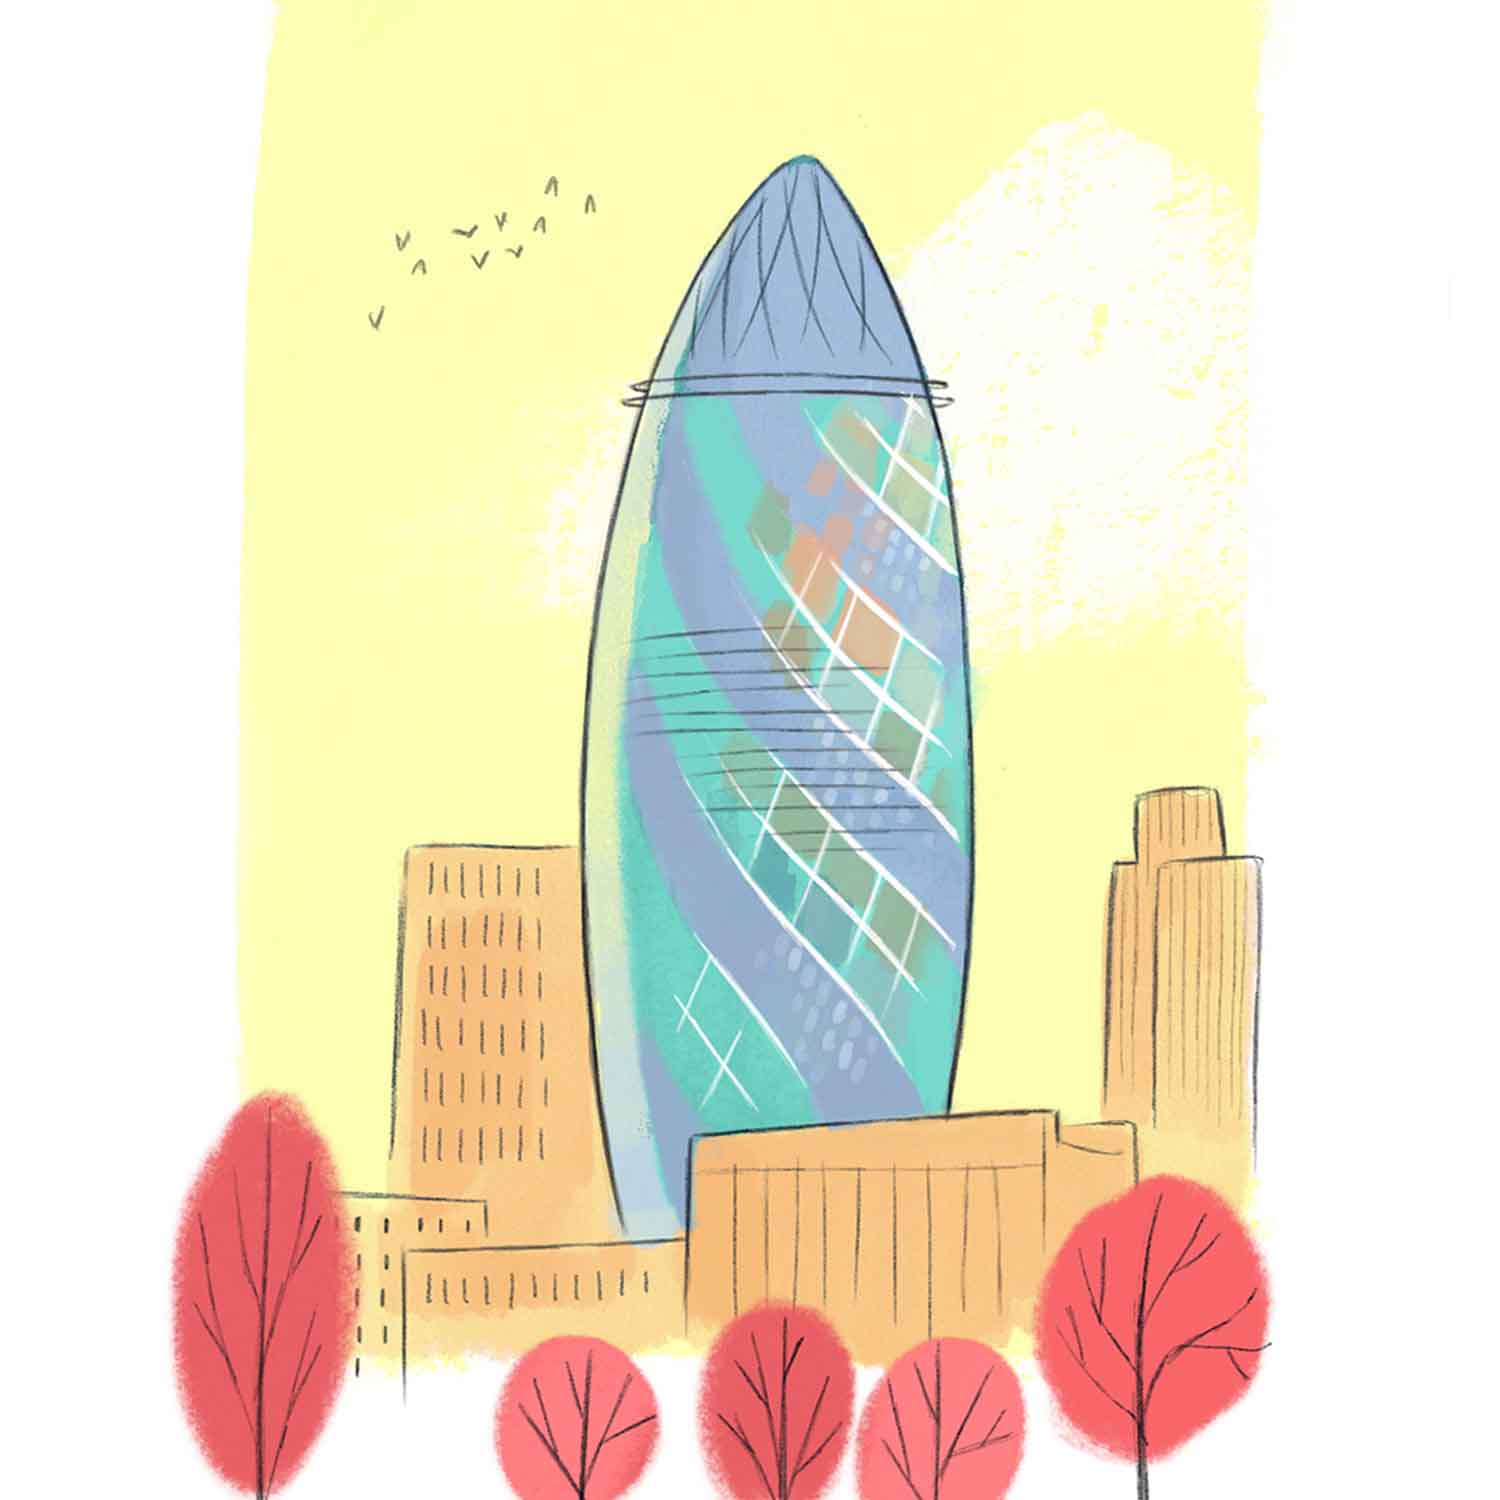 A close up London's The Gherkin illustration by mike green illustration.